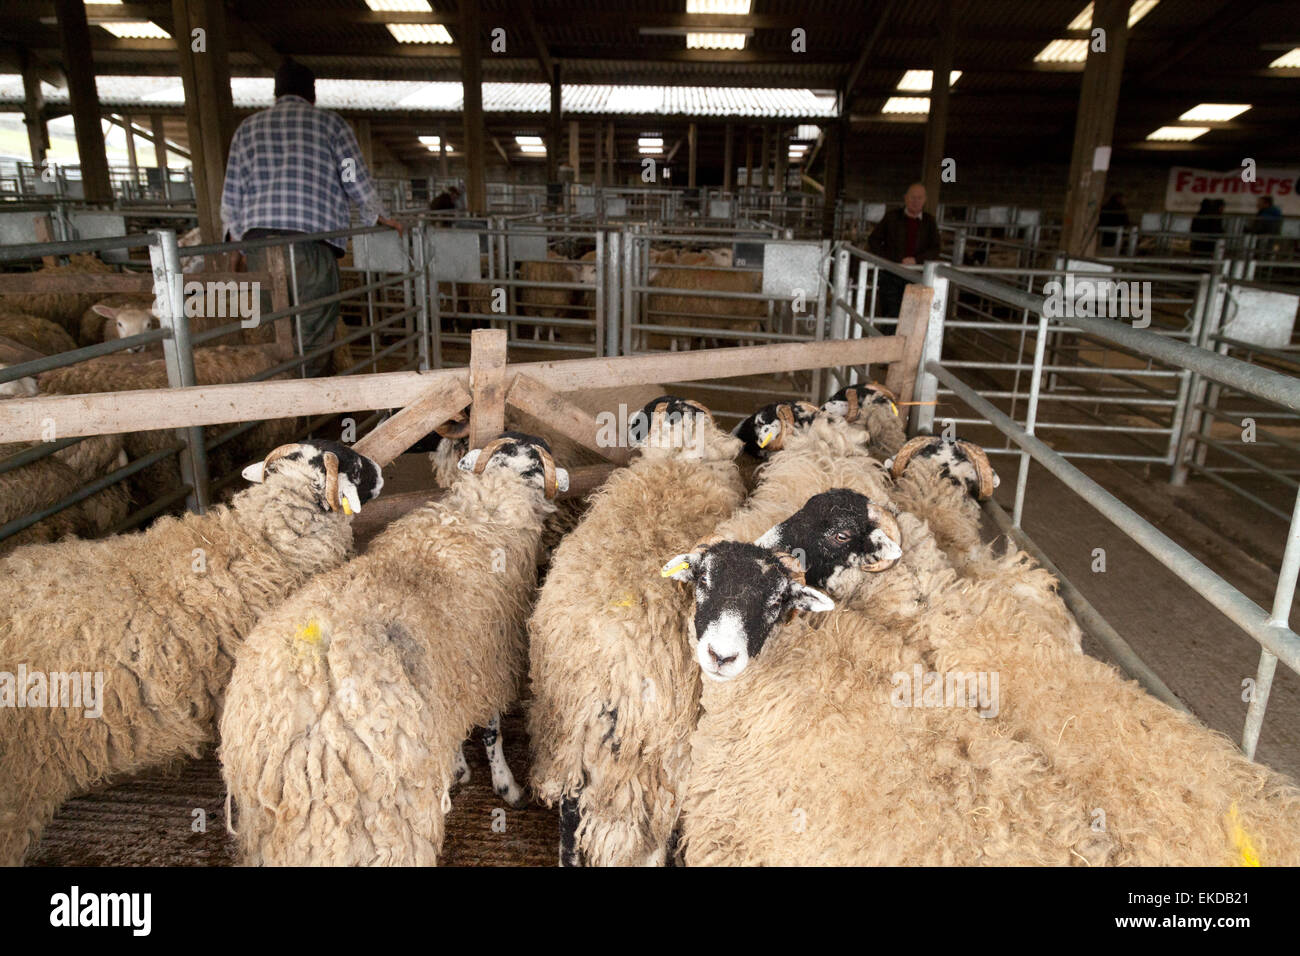 Swaledale sheep in a pen for an auction, Hawes sheep market, North Yorkshire Dales, UK Stock Photo